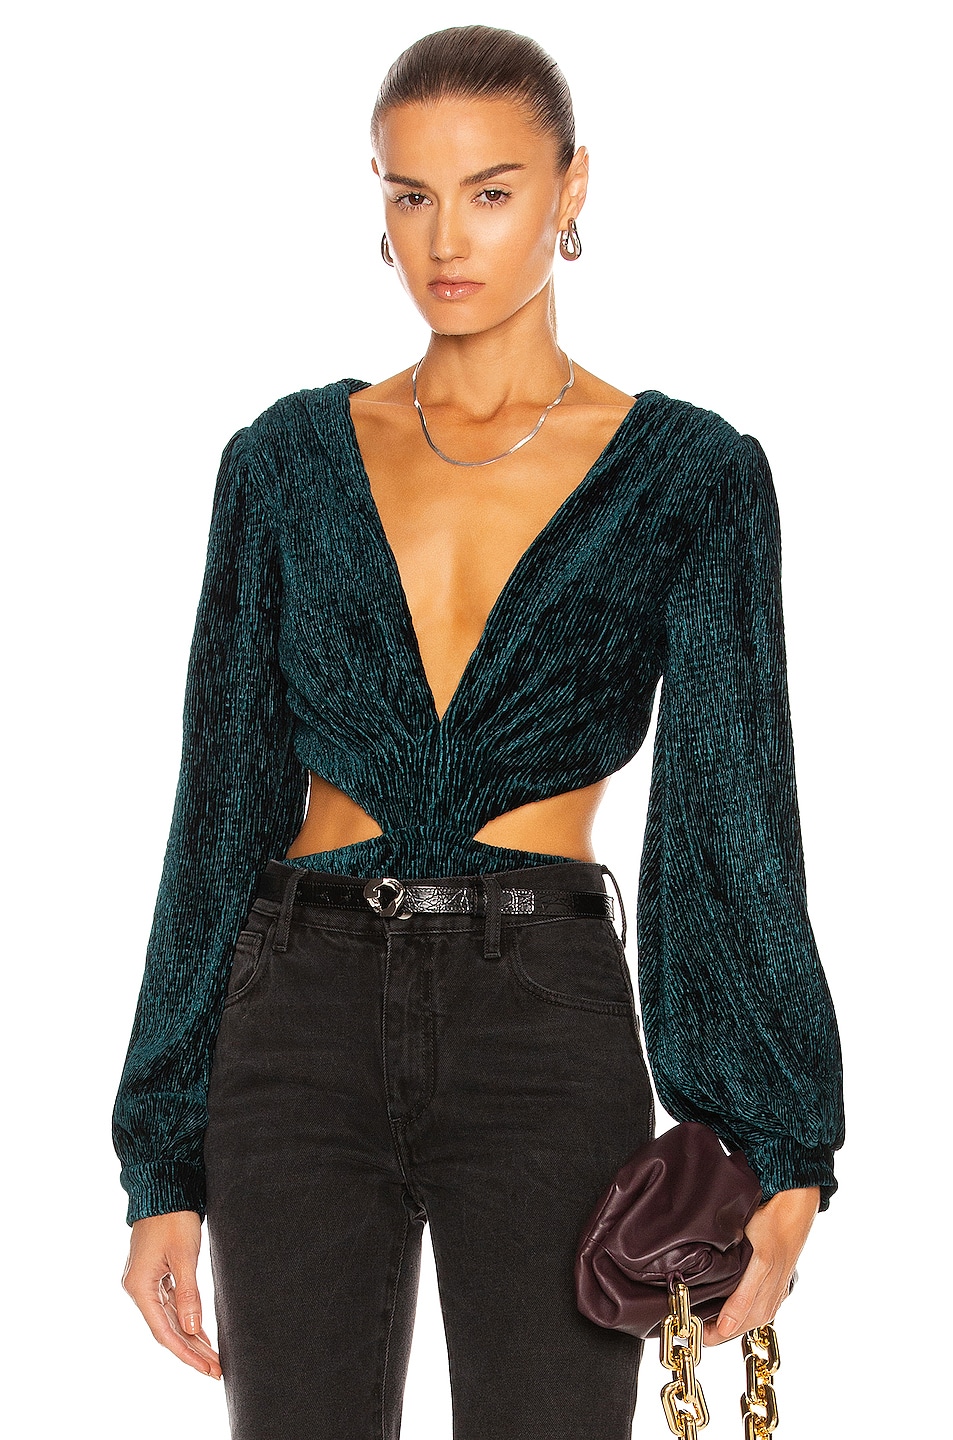 PatBO Textured Velvet Cut-Out Bodysuit in Prussian Green | FWRD